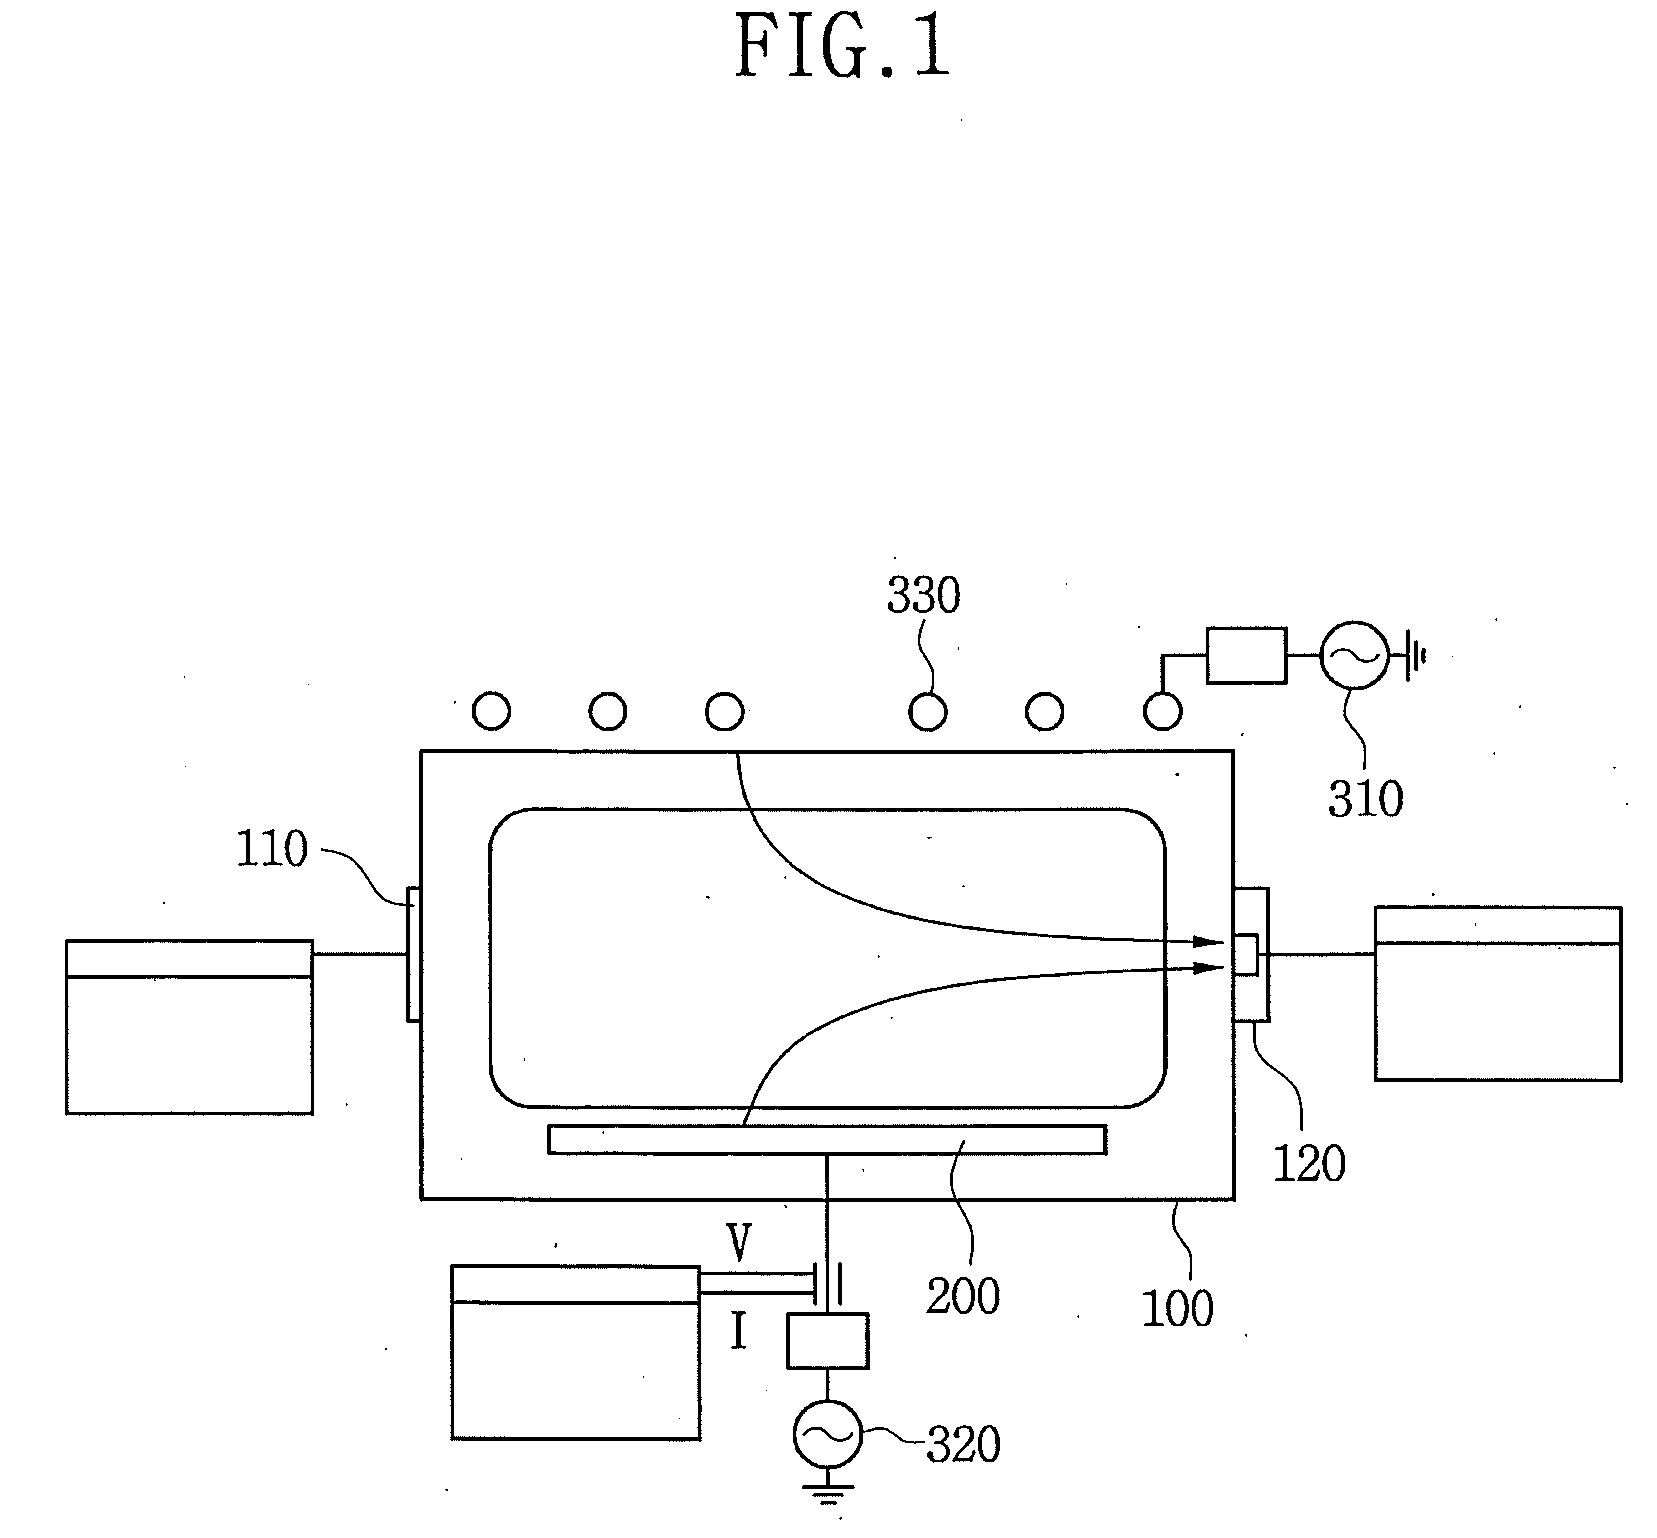 Methods of Selecting Sensors for Detecting Abnormalities in Semiconductor Manufacturing Processes